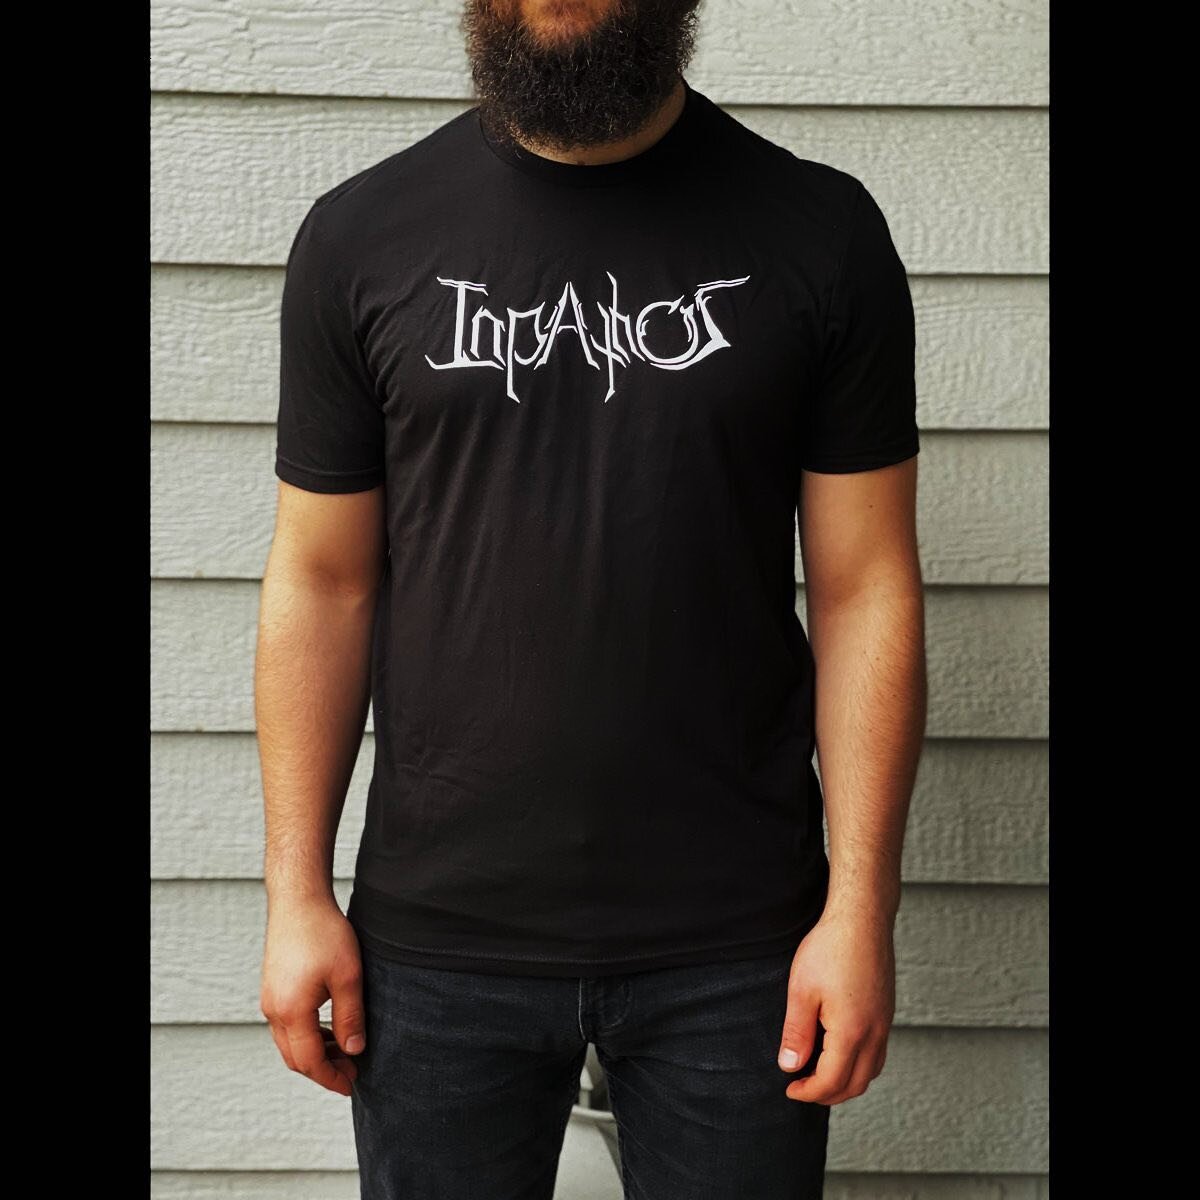 Recent restock on most sizes for shirts, and a new size added (XXL!) Want to rep your favorite Melodeath band in the Northwest? Then hit up our Bandcamp link in our bio, or if you&rsquo;re local, reach out to one of the band members and we can drop o